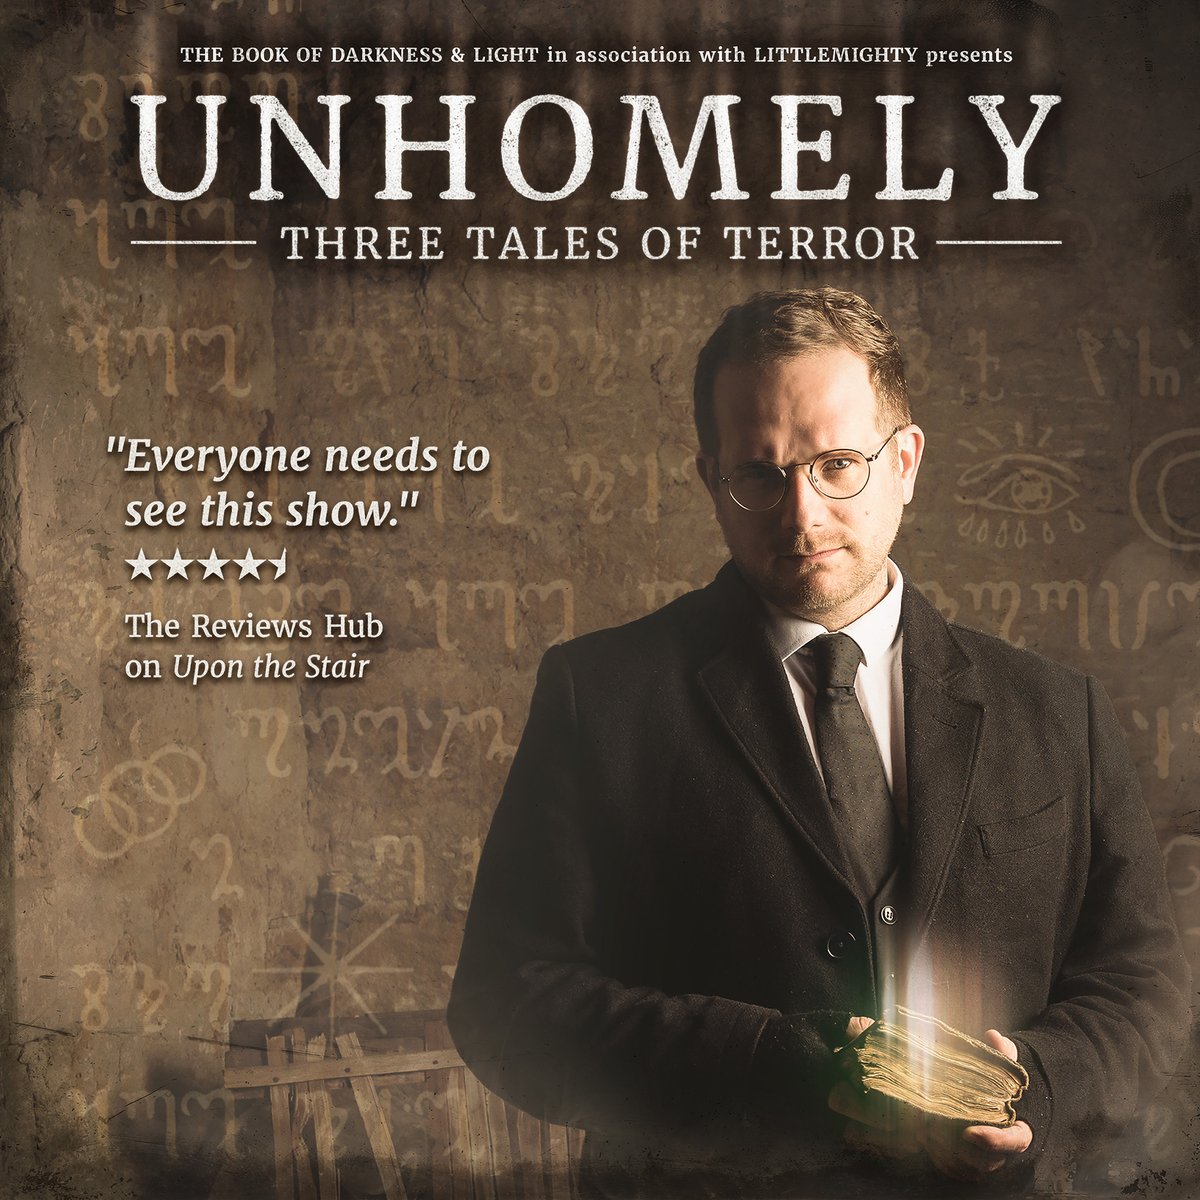 💀 Are you ready for three tales of terror? UNHOMELY comes to @LeedsPlayhouse 21-23 March. Chilling stories, integrated BSL in every performance. Stars @ThisDuffy @missamyhelena and @Adam_Zed. You've never seen a horror show like this before. 🎟️ TICKETS below...